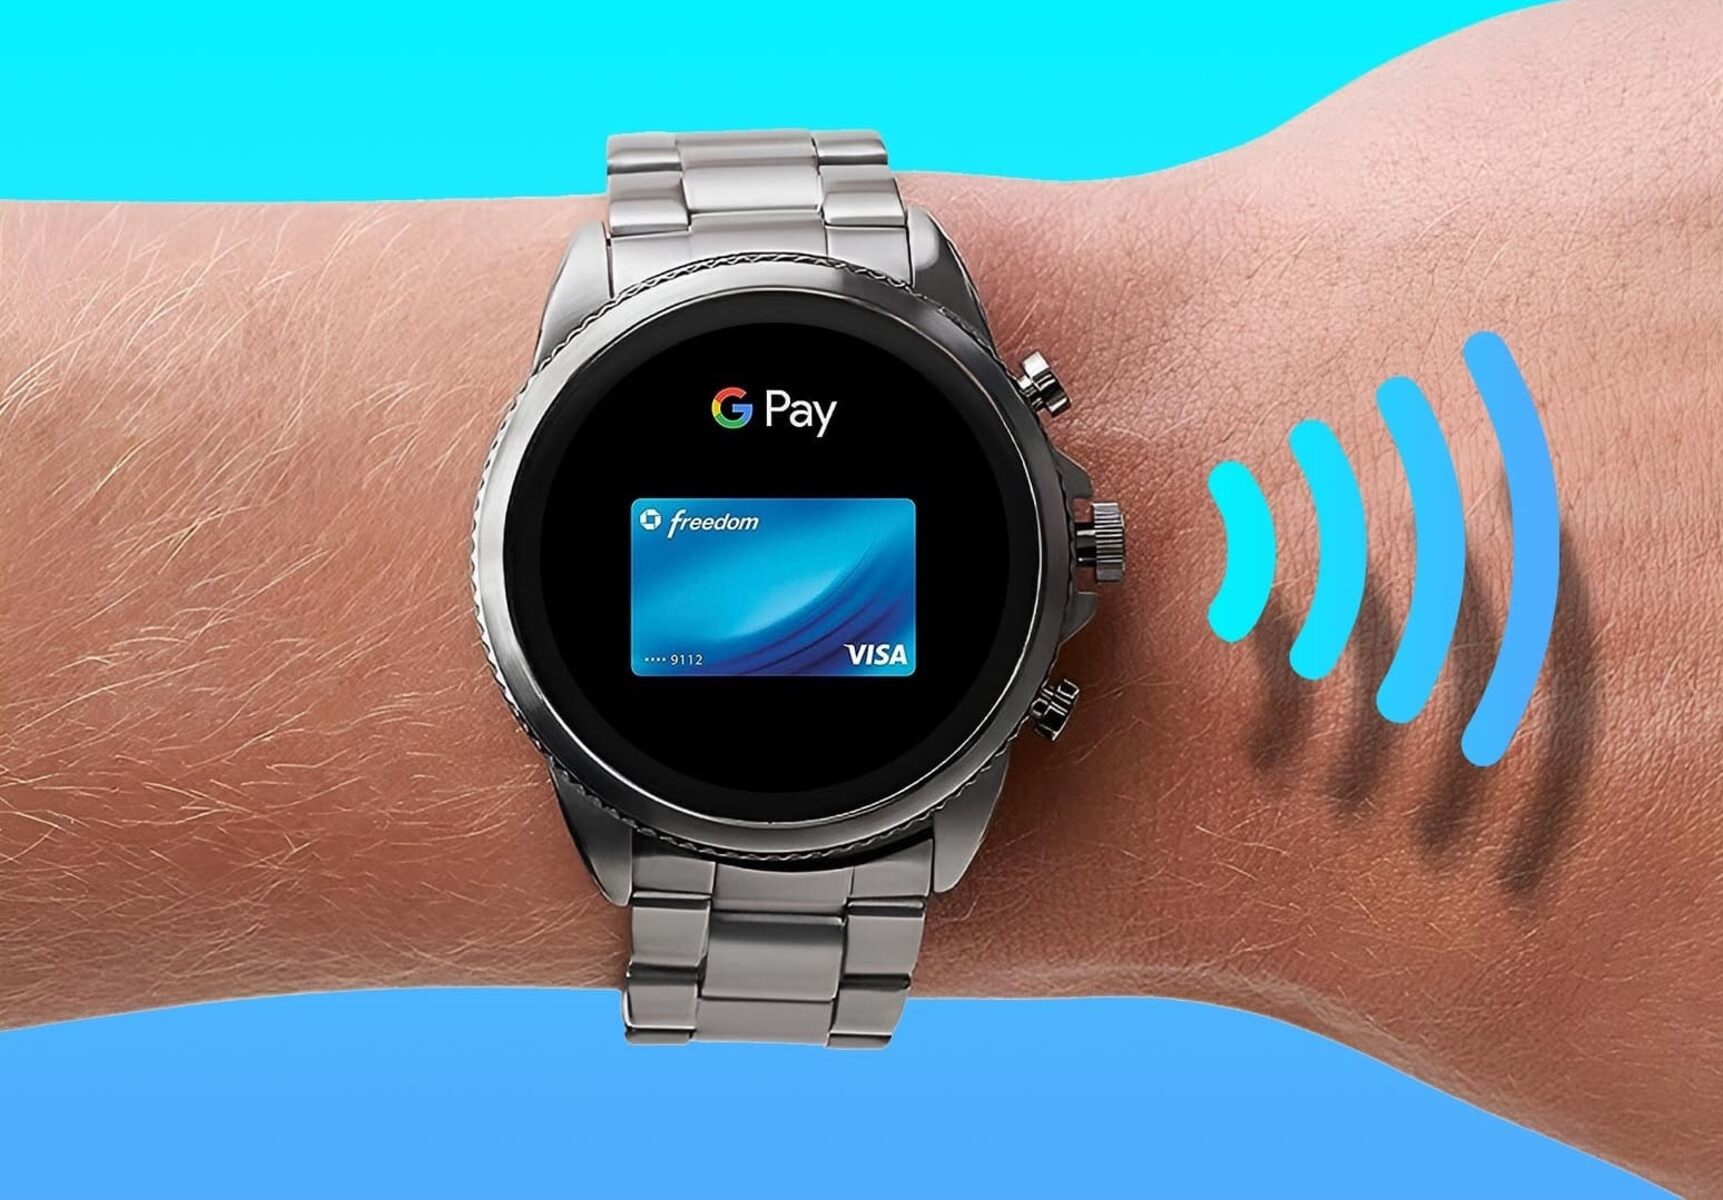 NFC On Smartwatches: Exploring Near Field Communication